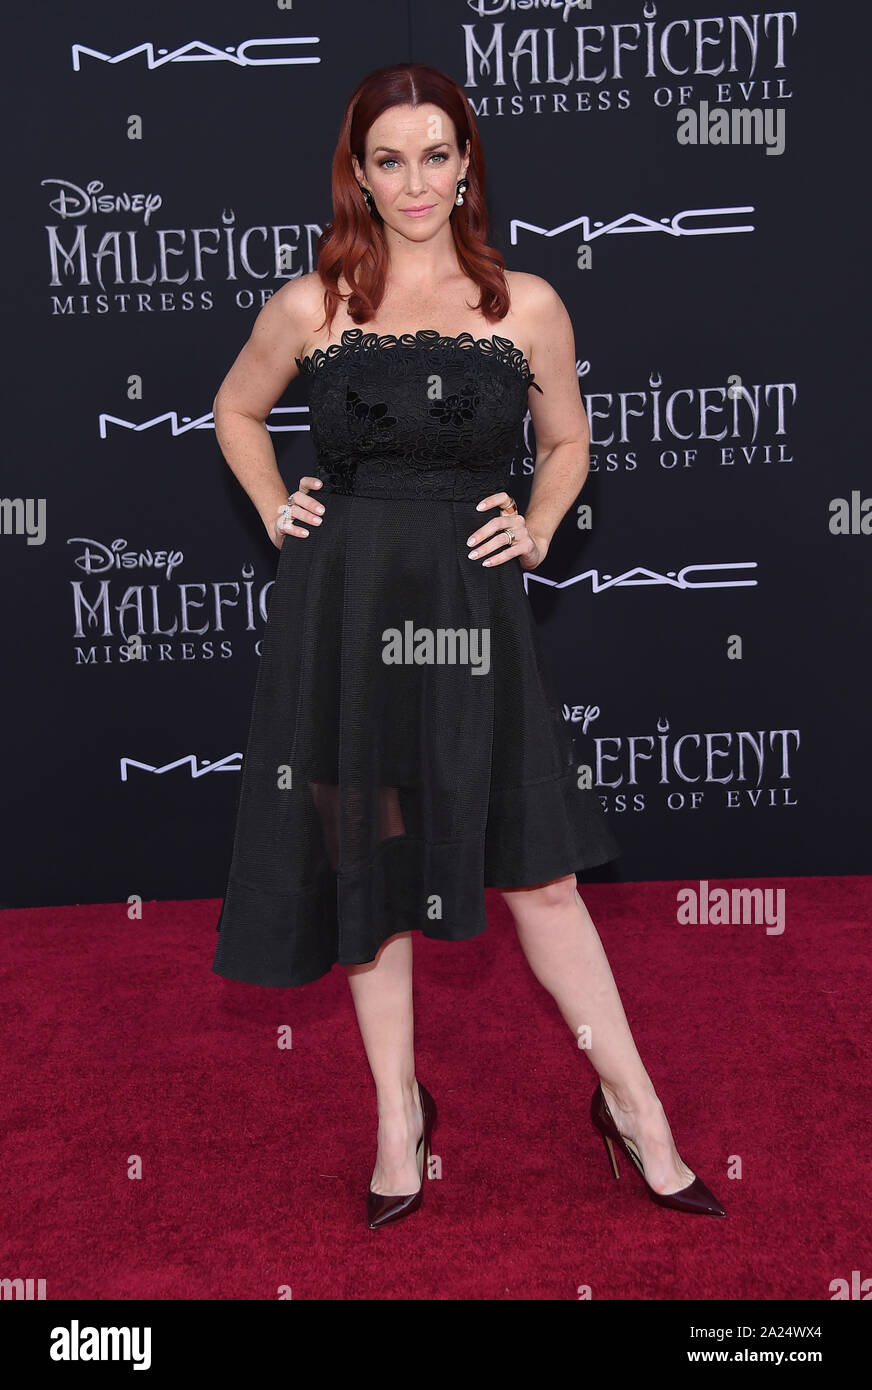 September 30, 2019, Hollywood, California, USA: Annie Wersching arrives for the 'Maleficent: Mistress of Evil' World Premiere at the El Capitan theater. (Credit Image: © Lisa O'Connor/ZUMA Wire) Stock Photo